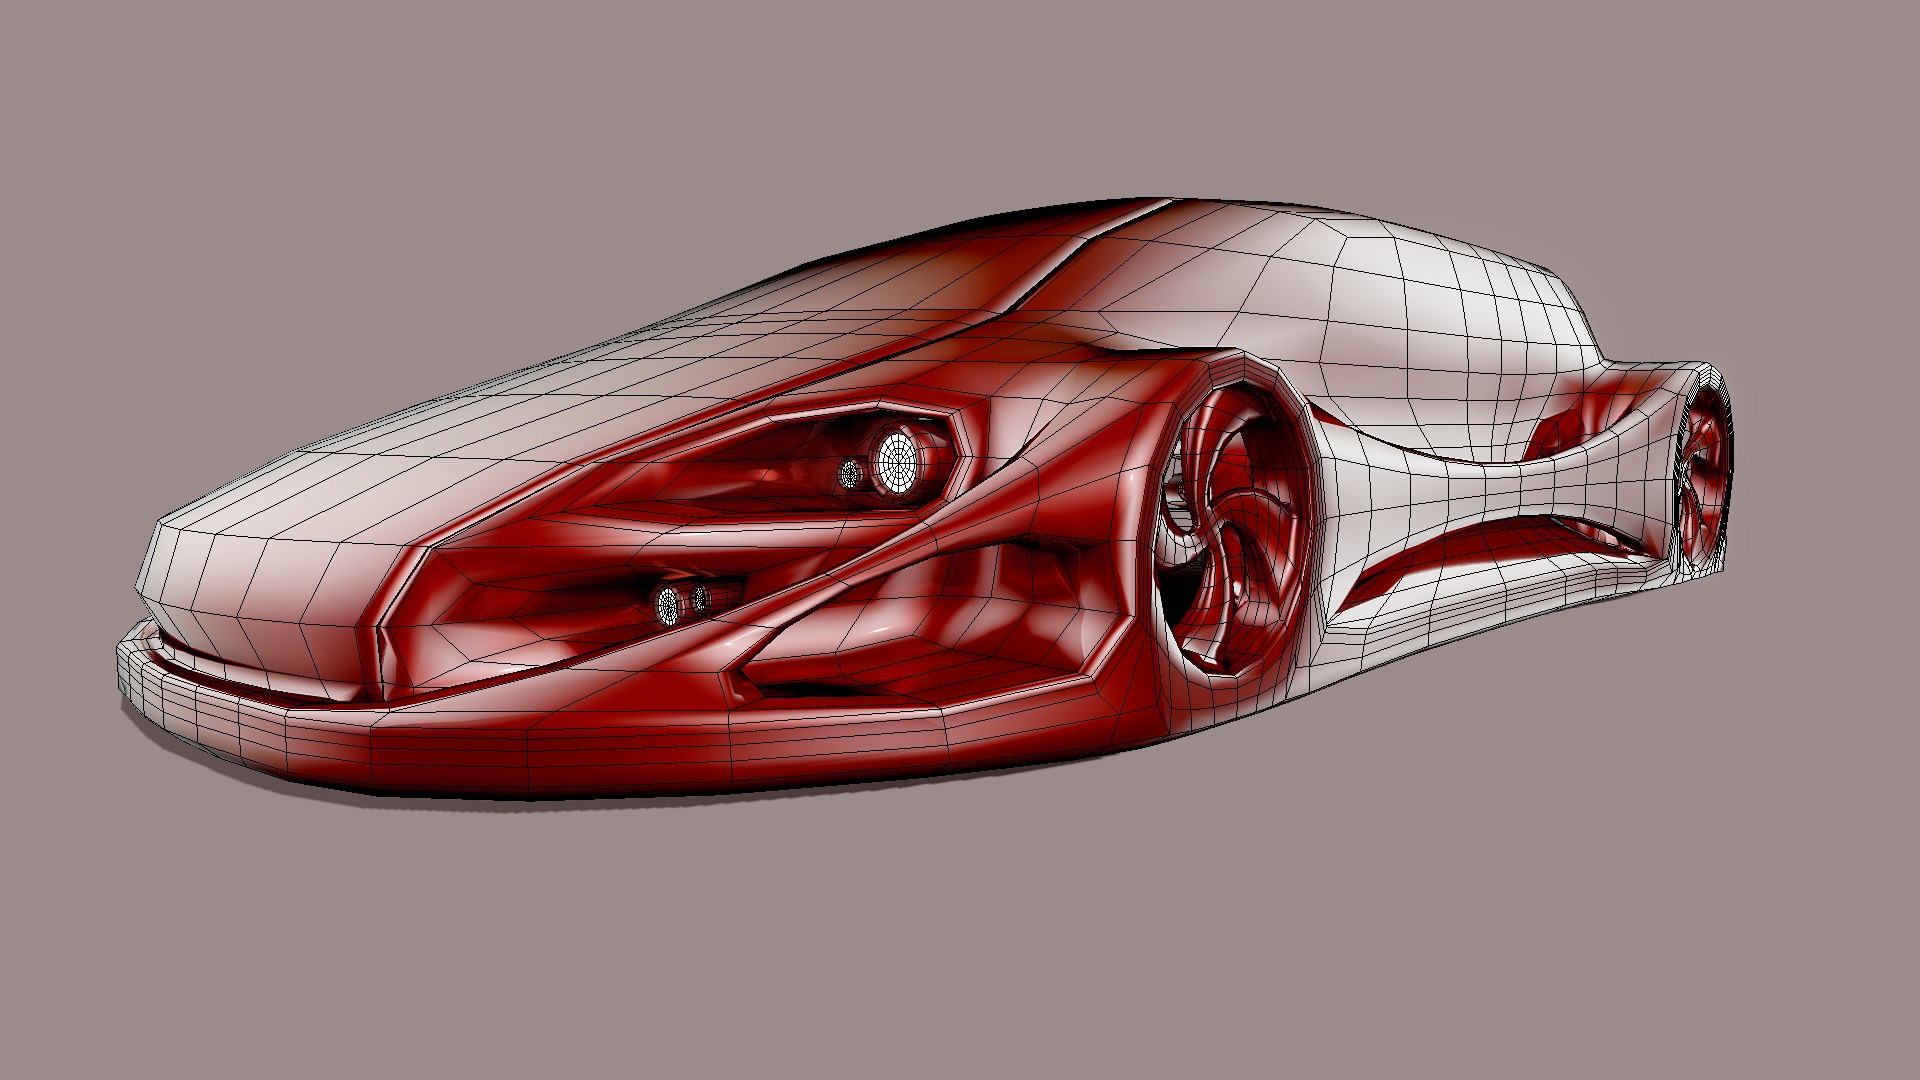 3D model Futuristic Car HD 09 - This is a 3D model of the Futuristic Car HD 09. The 3D model is about a red and white car.